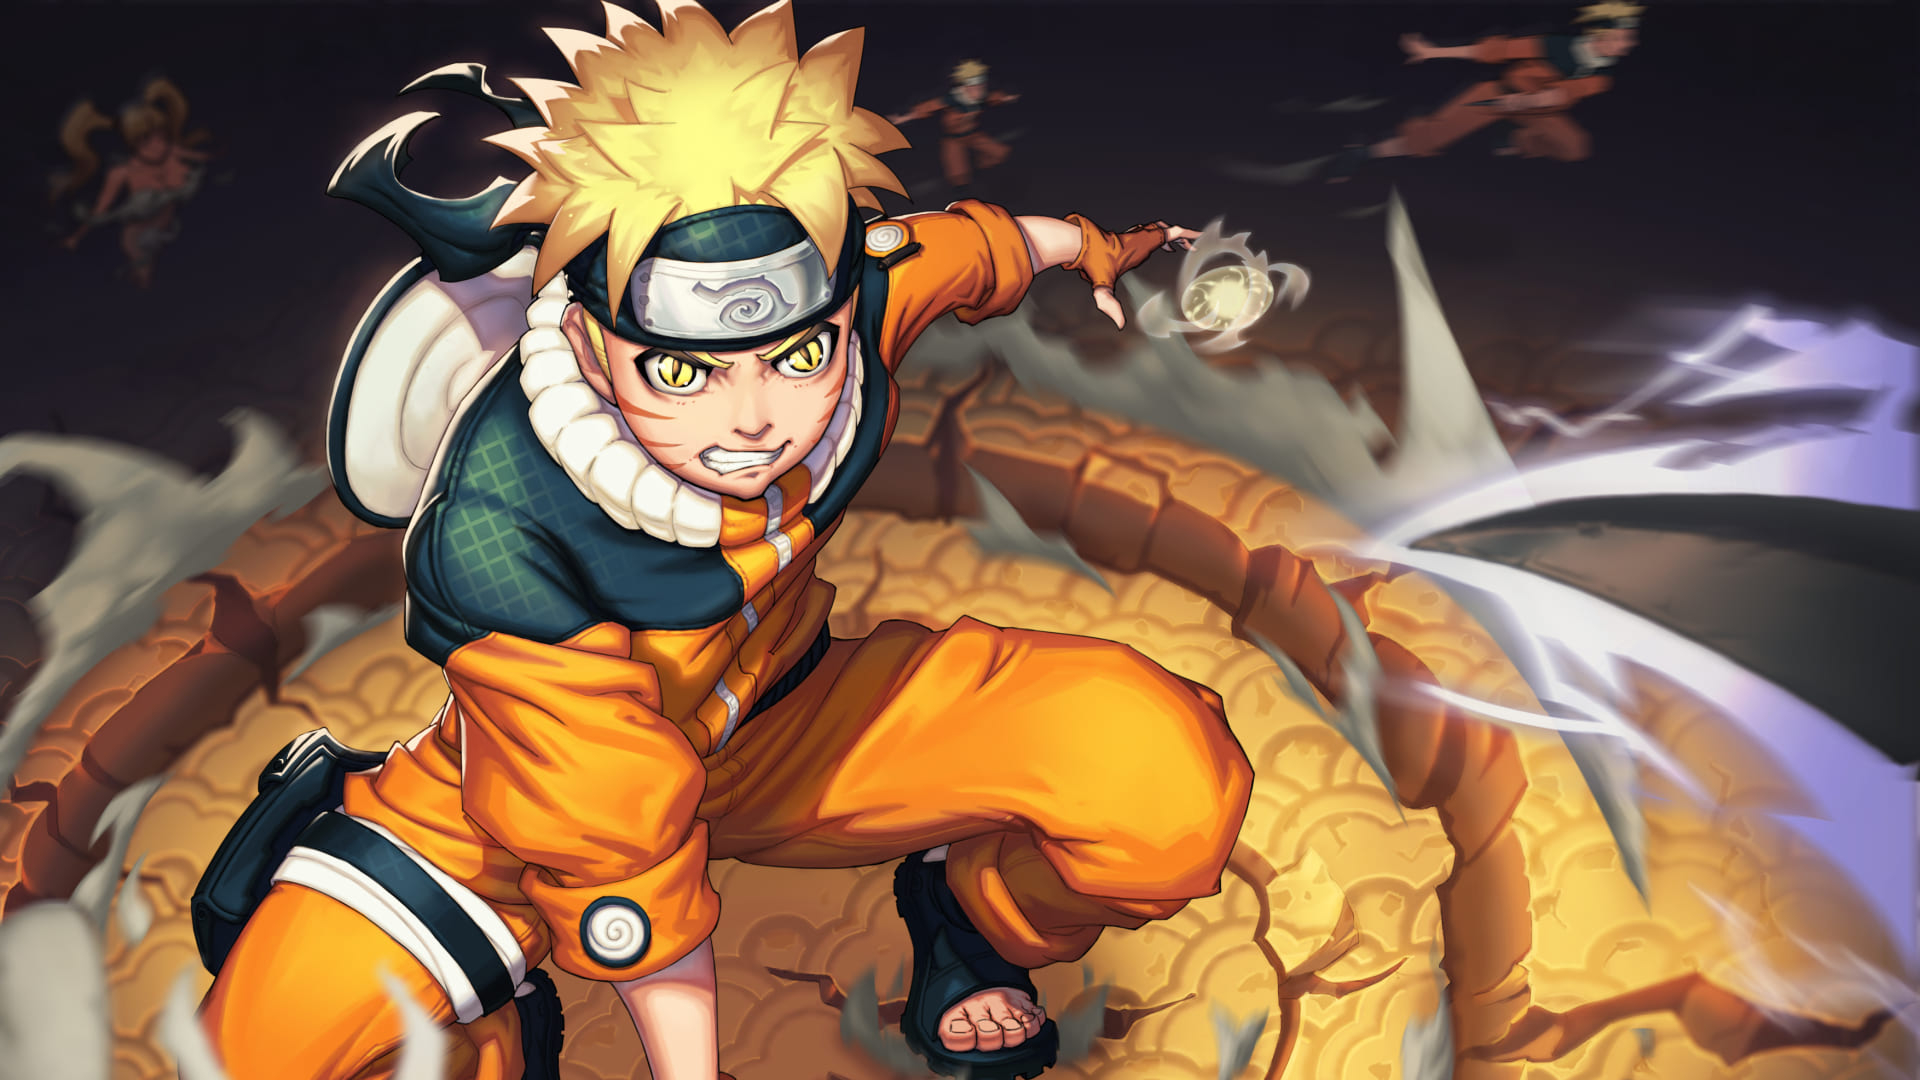 1920x1080 Naruto Wallpapers Top 75 Best Naruto Backgrounds Download